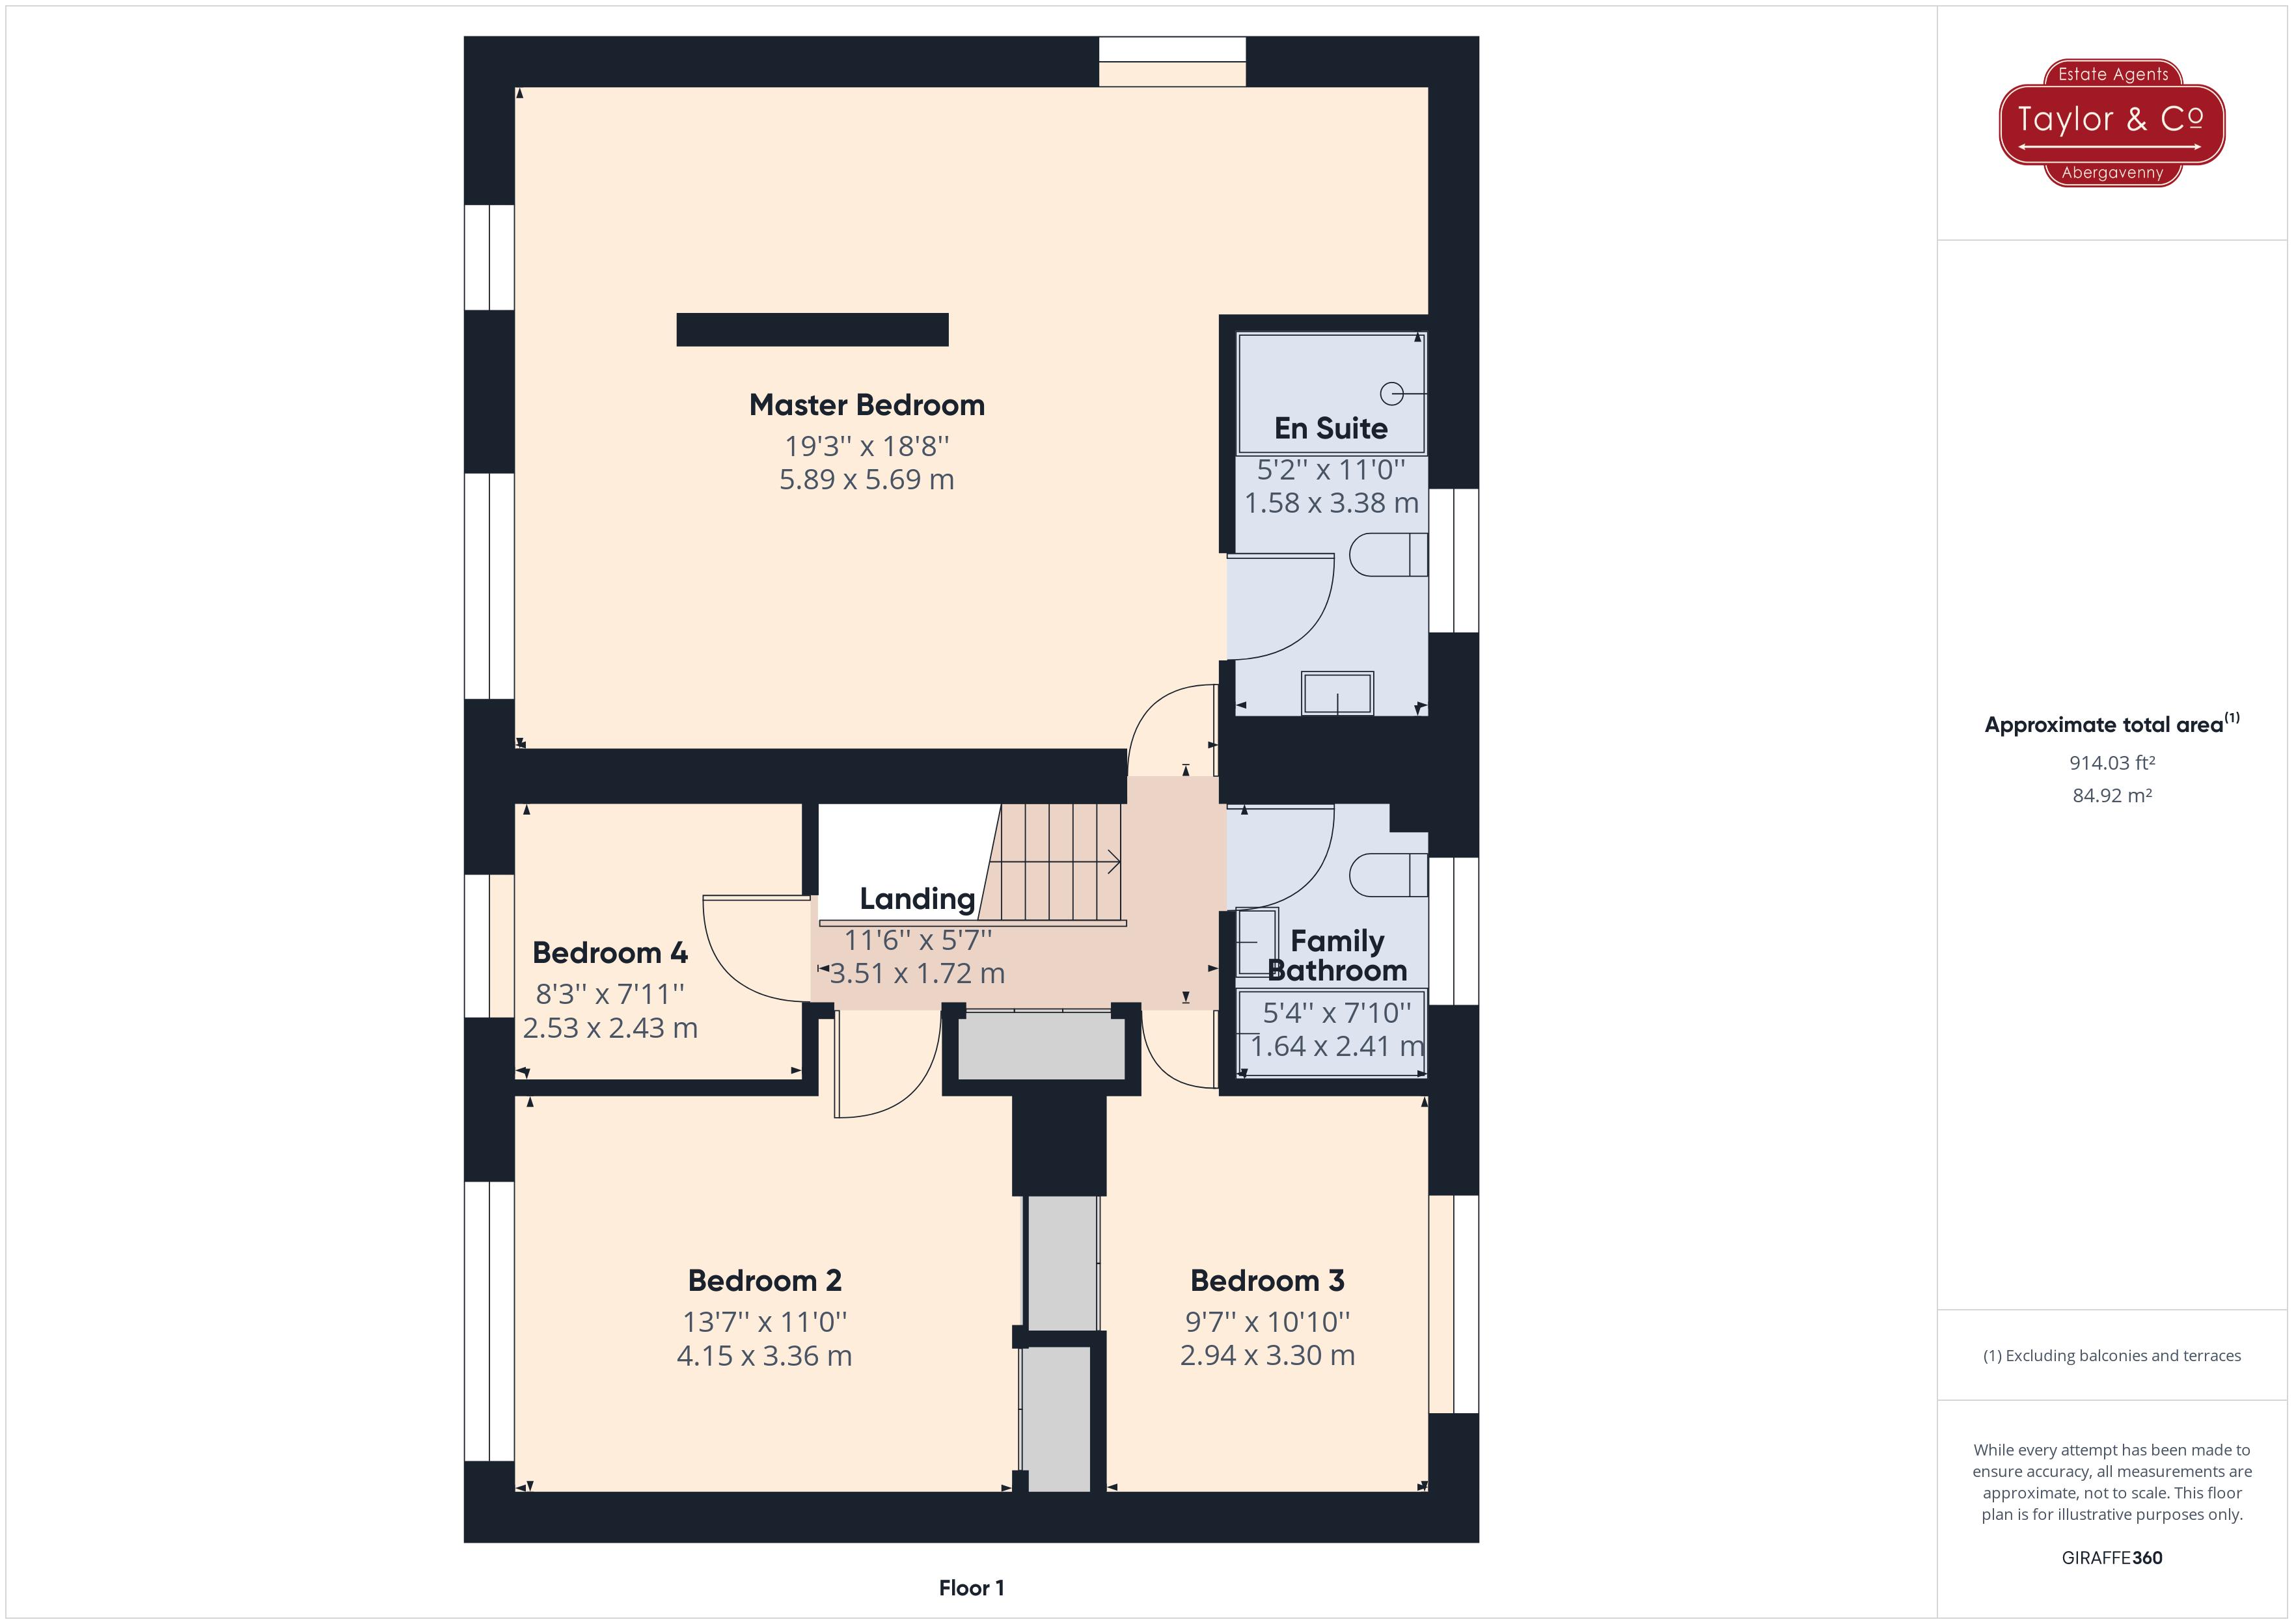 Floorplans For High spec with 2000+ sqft of luxury accommodation